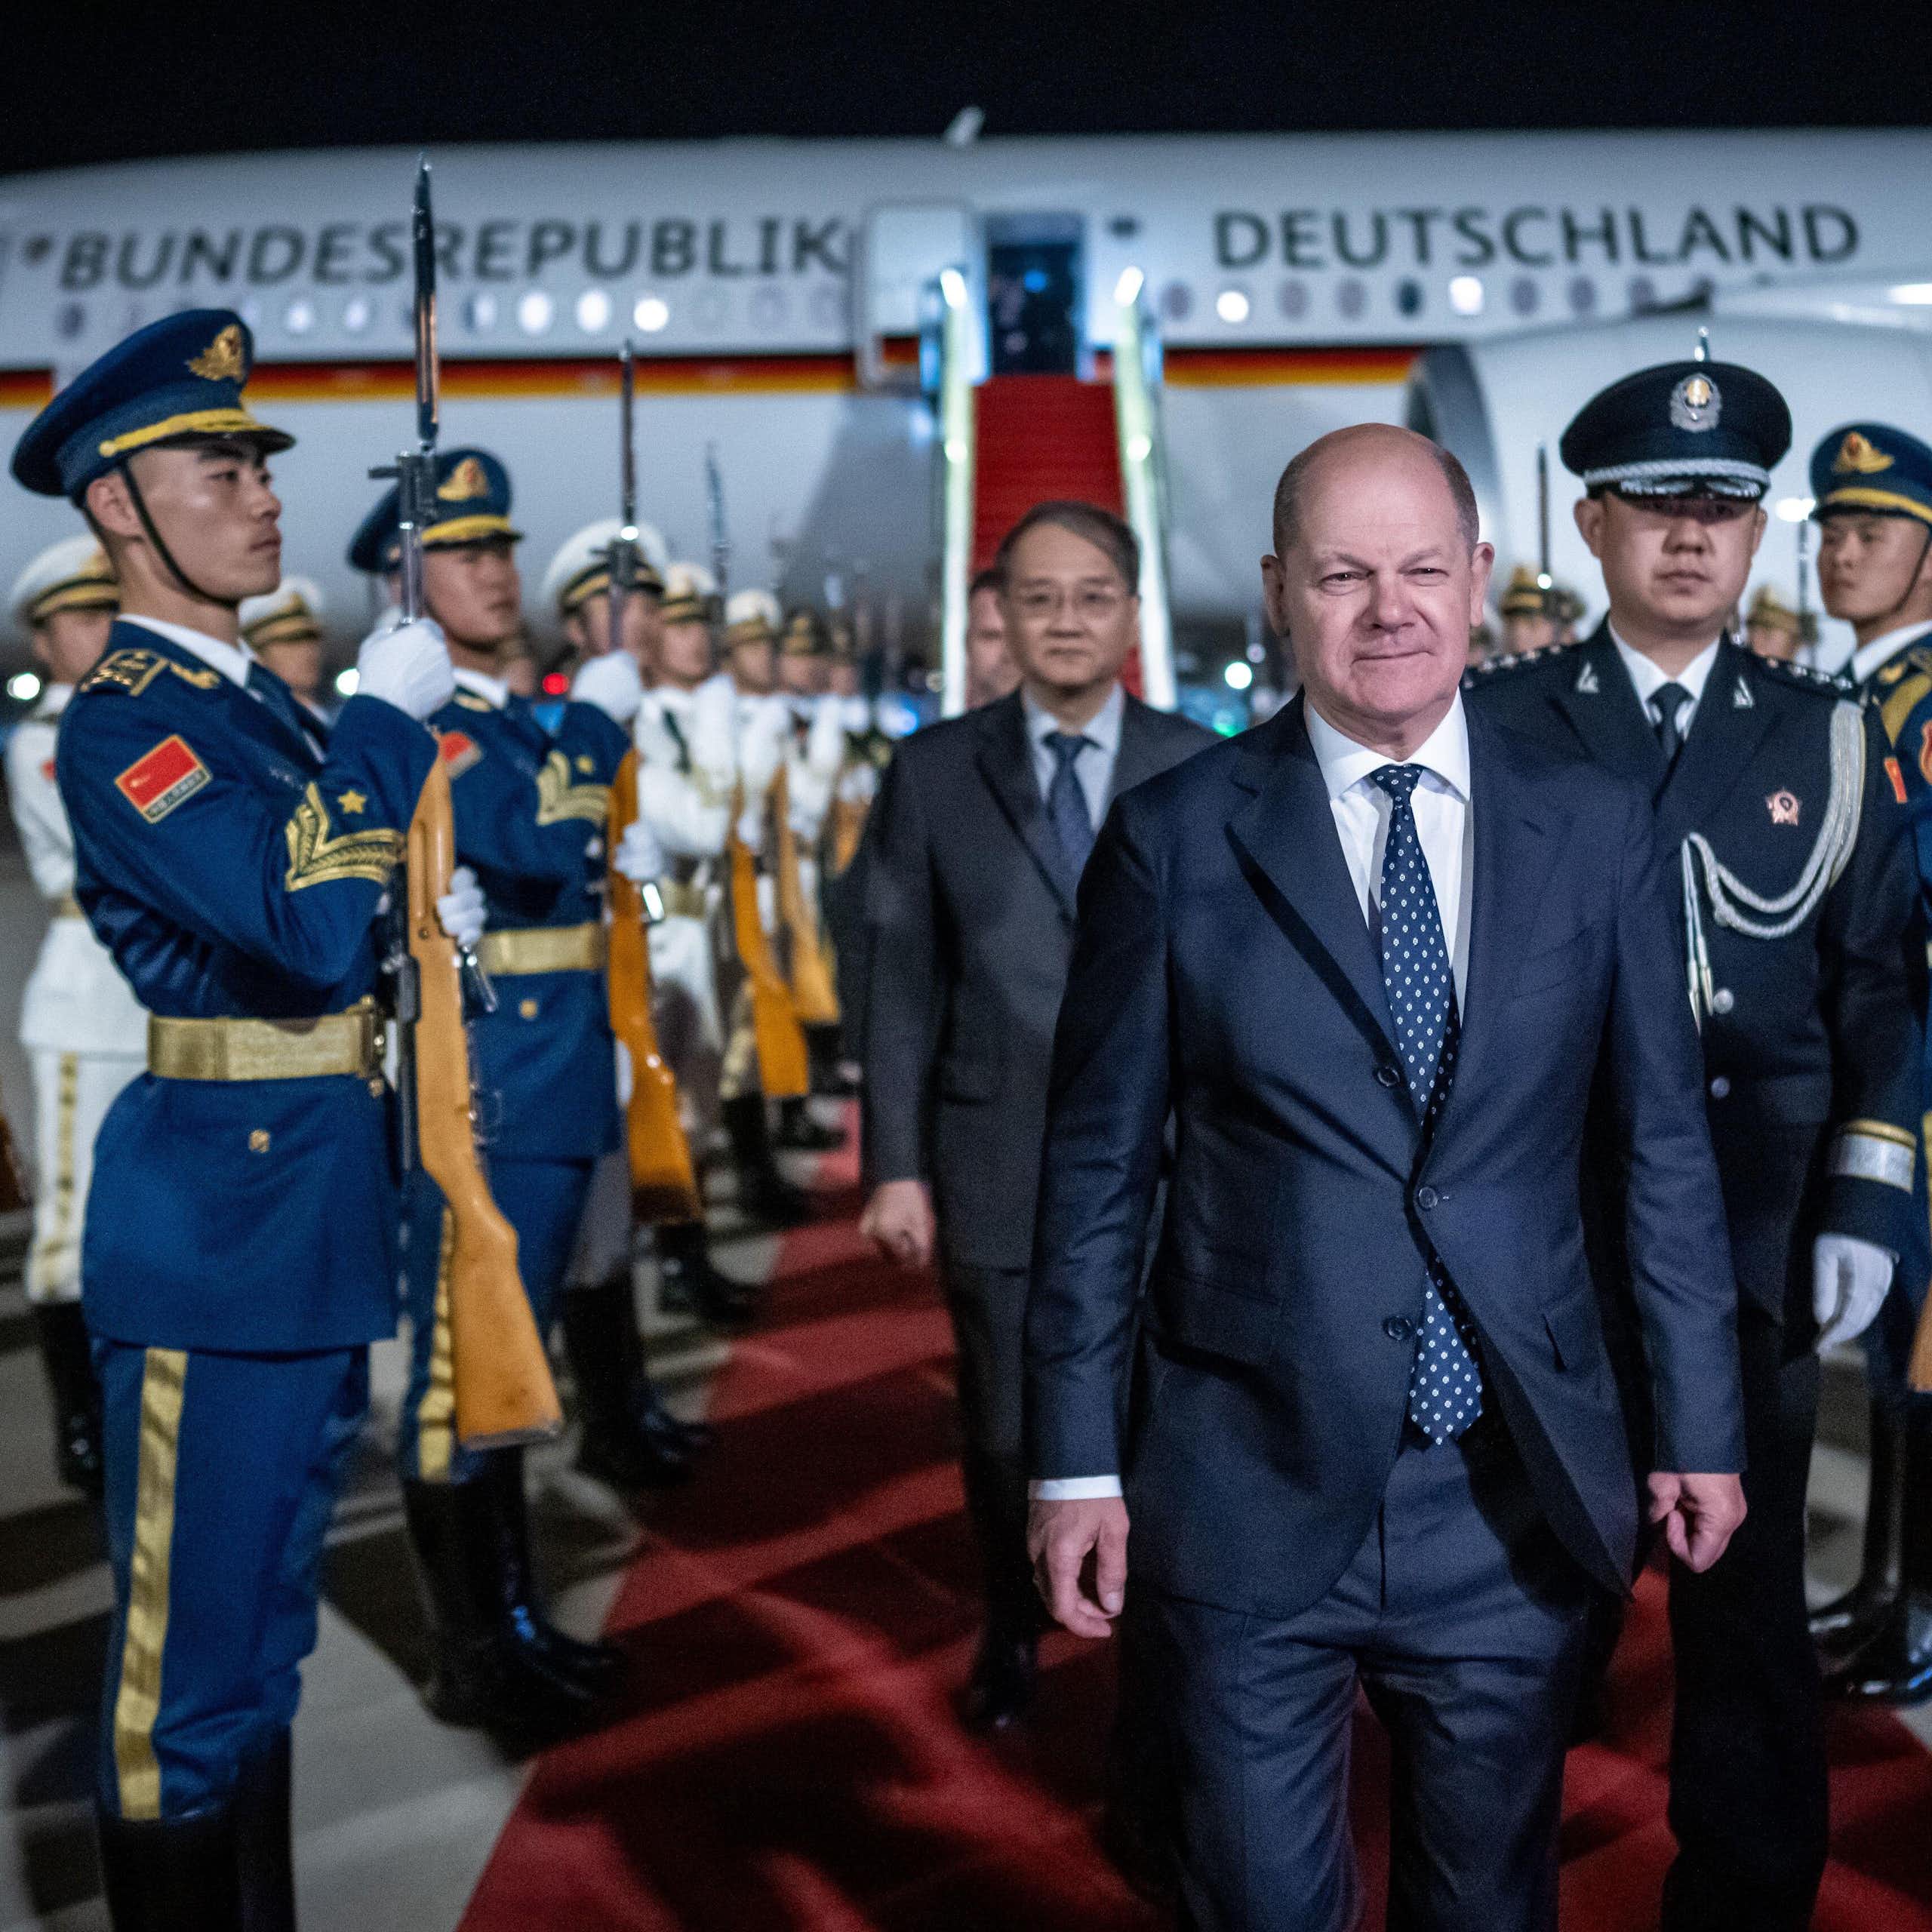 Germany's  chancellor, Olaf Scholz, exits a plane and walks between Chinese soldiers.